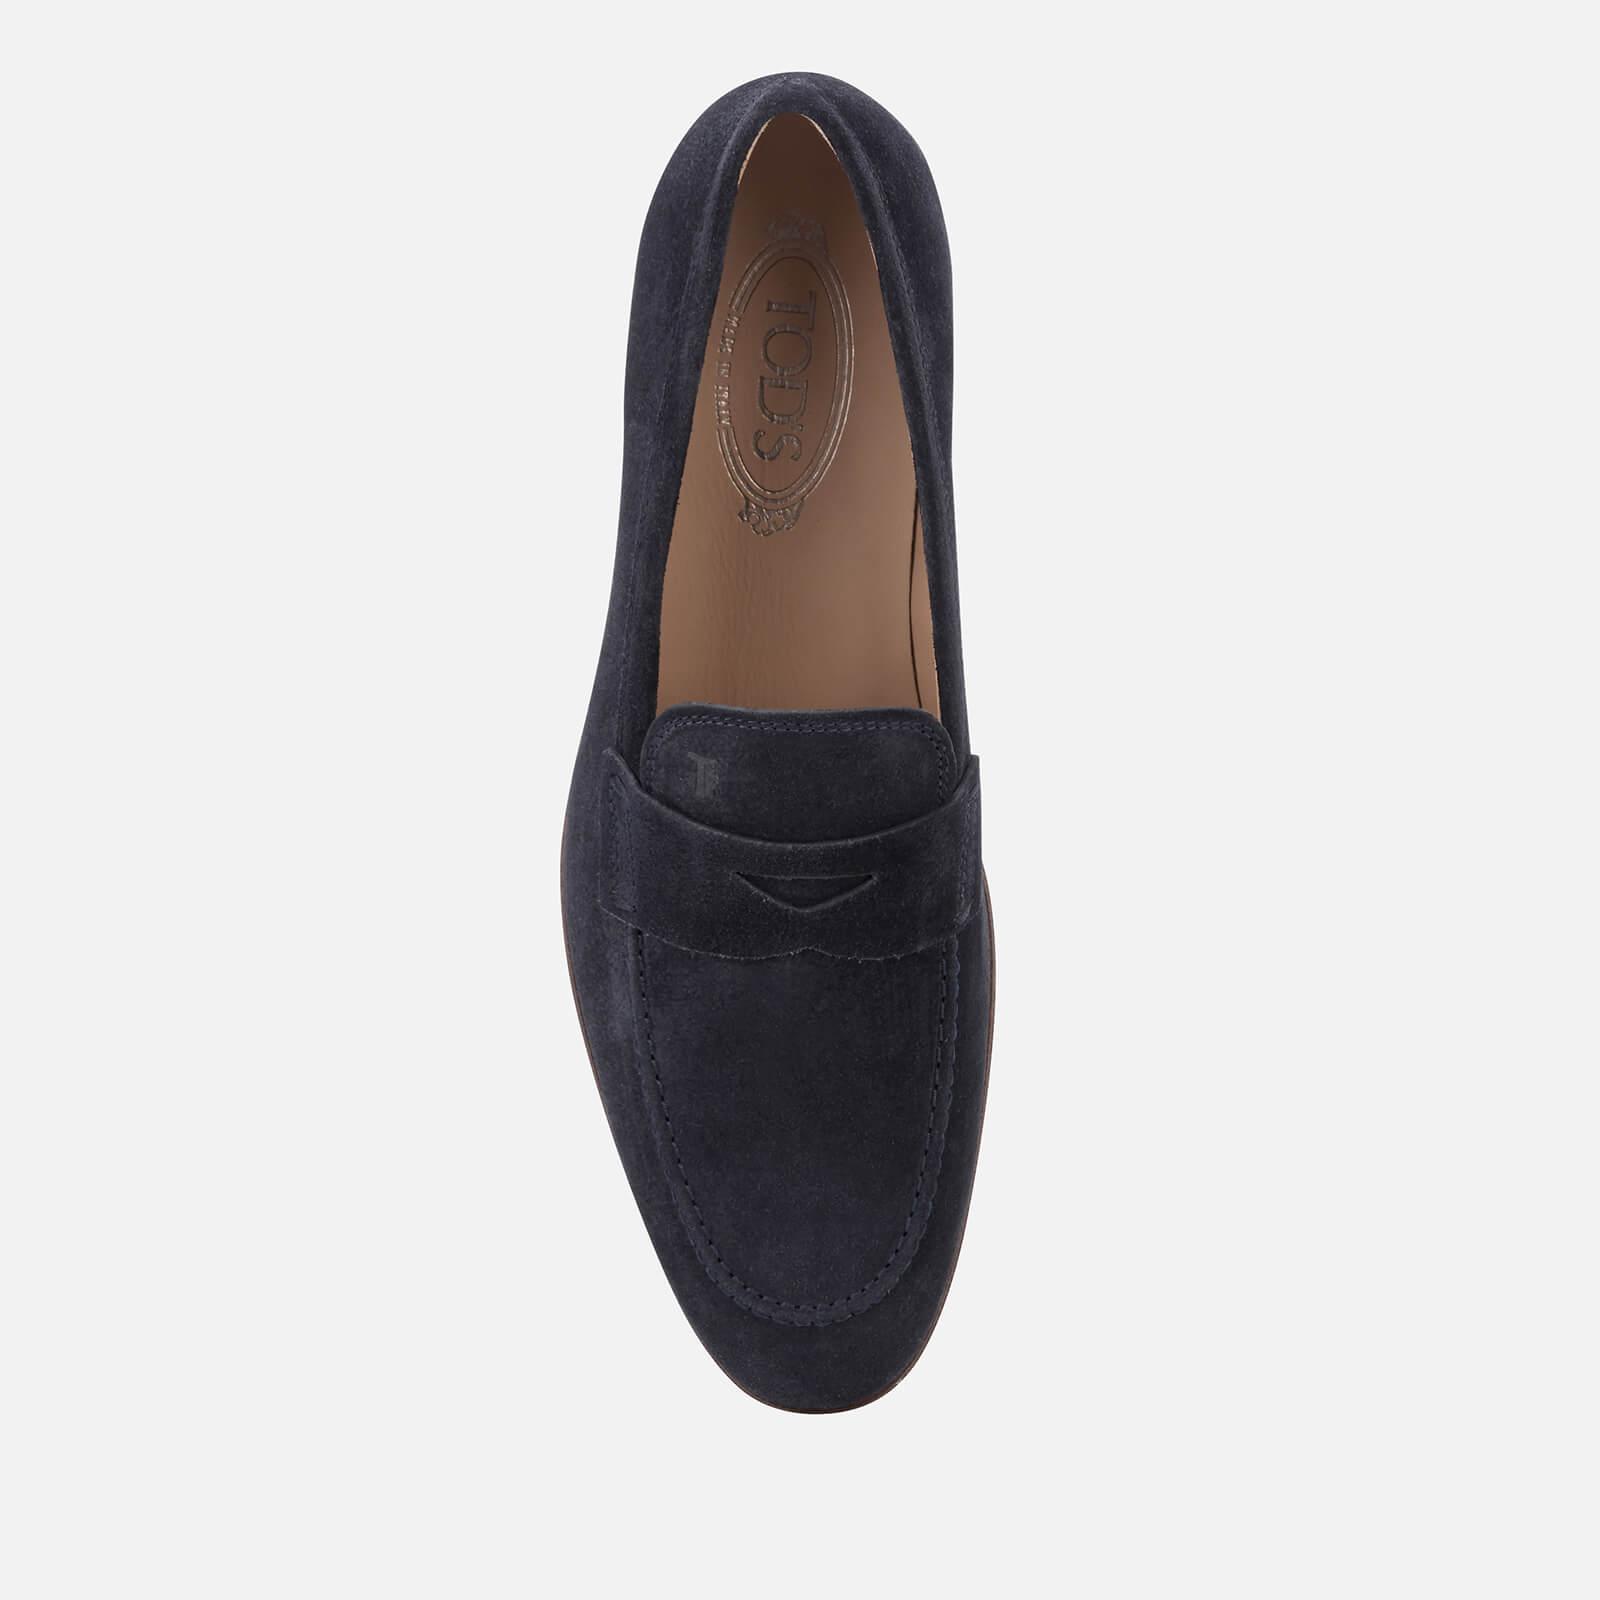 Tod's Leather Moccasin Shoes in Blue for Men - Lyst